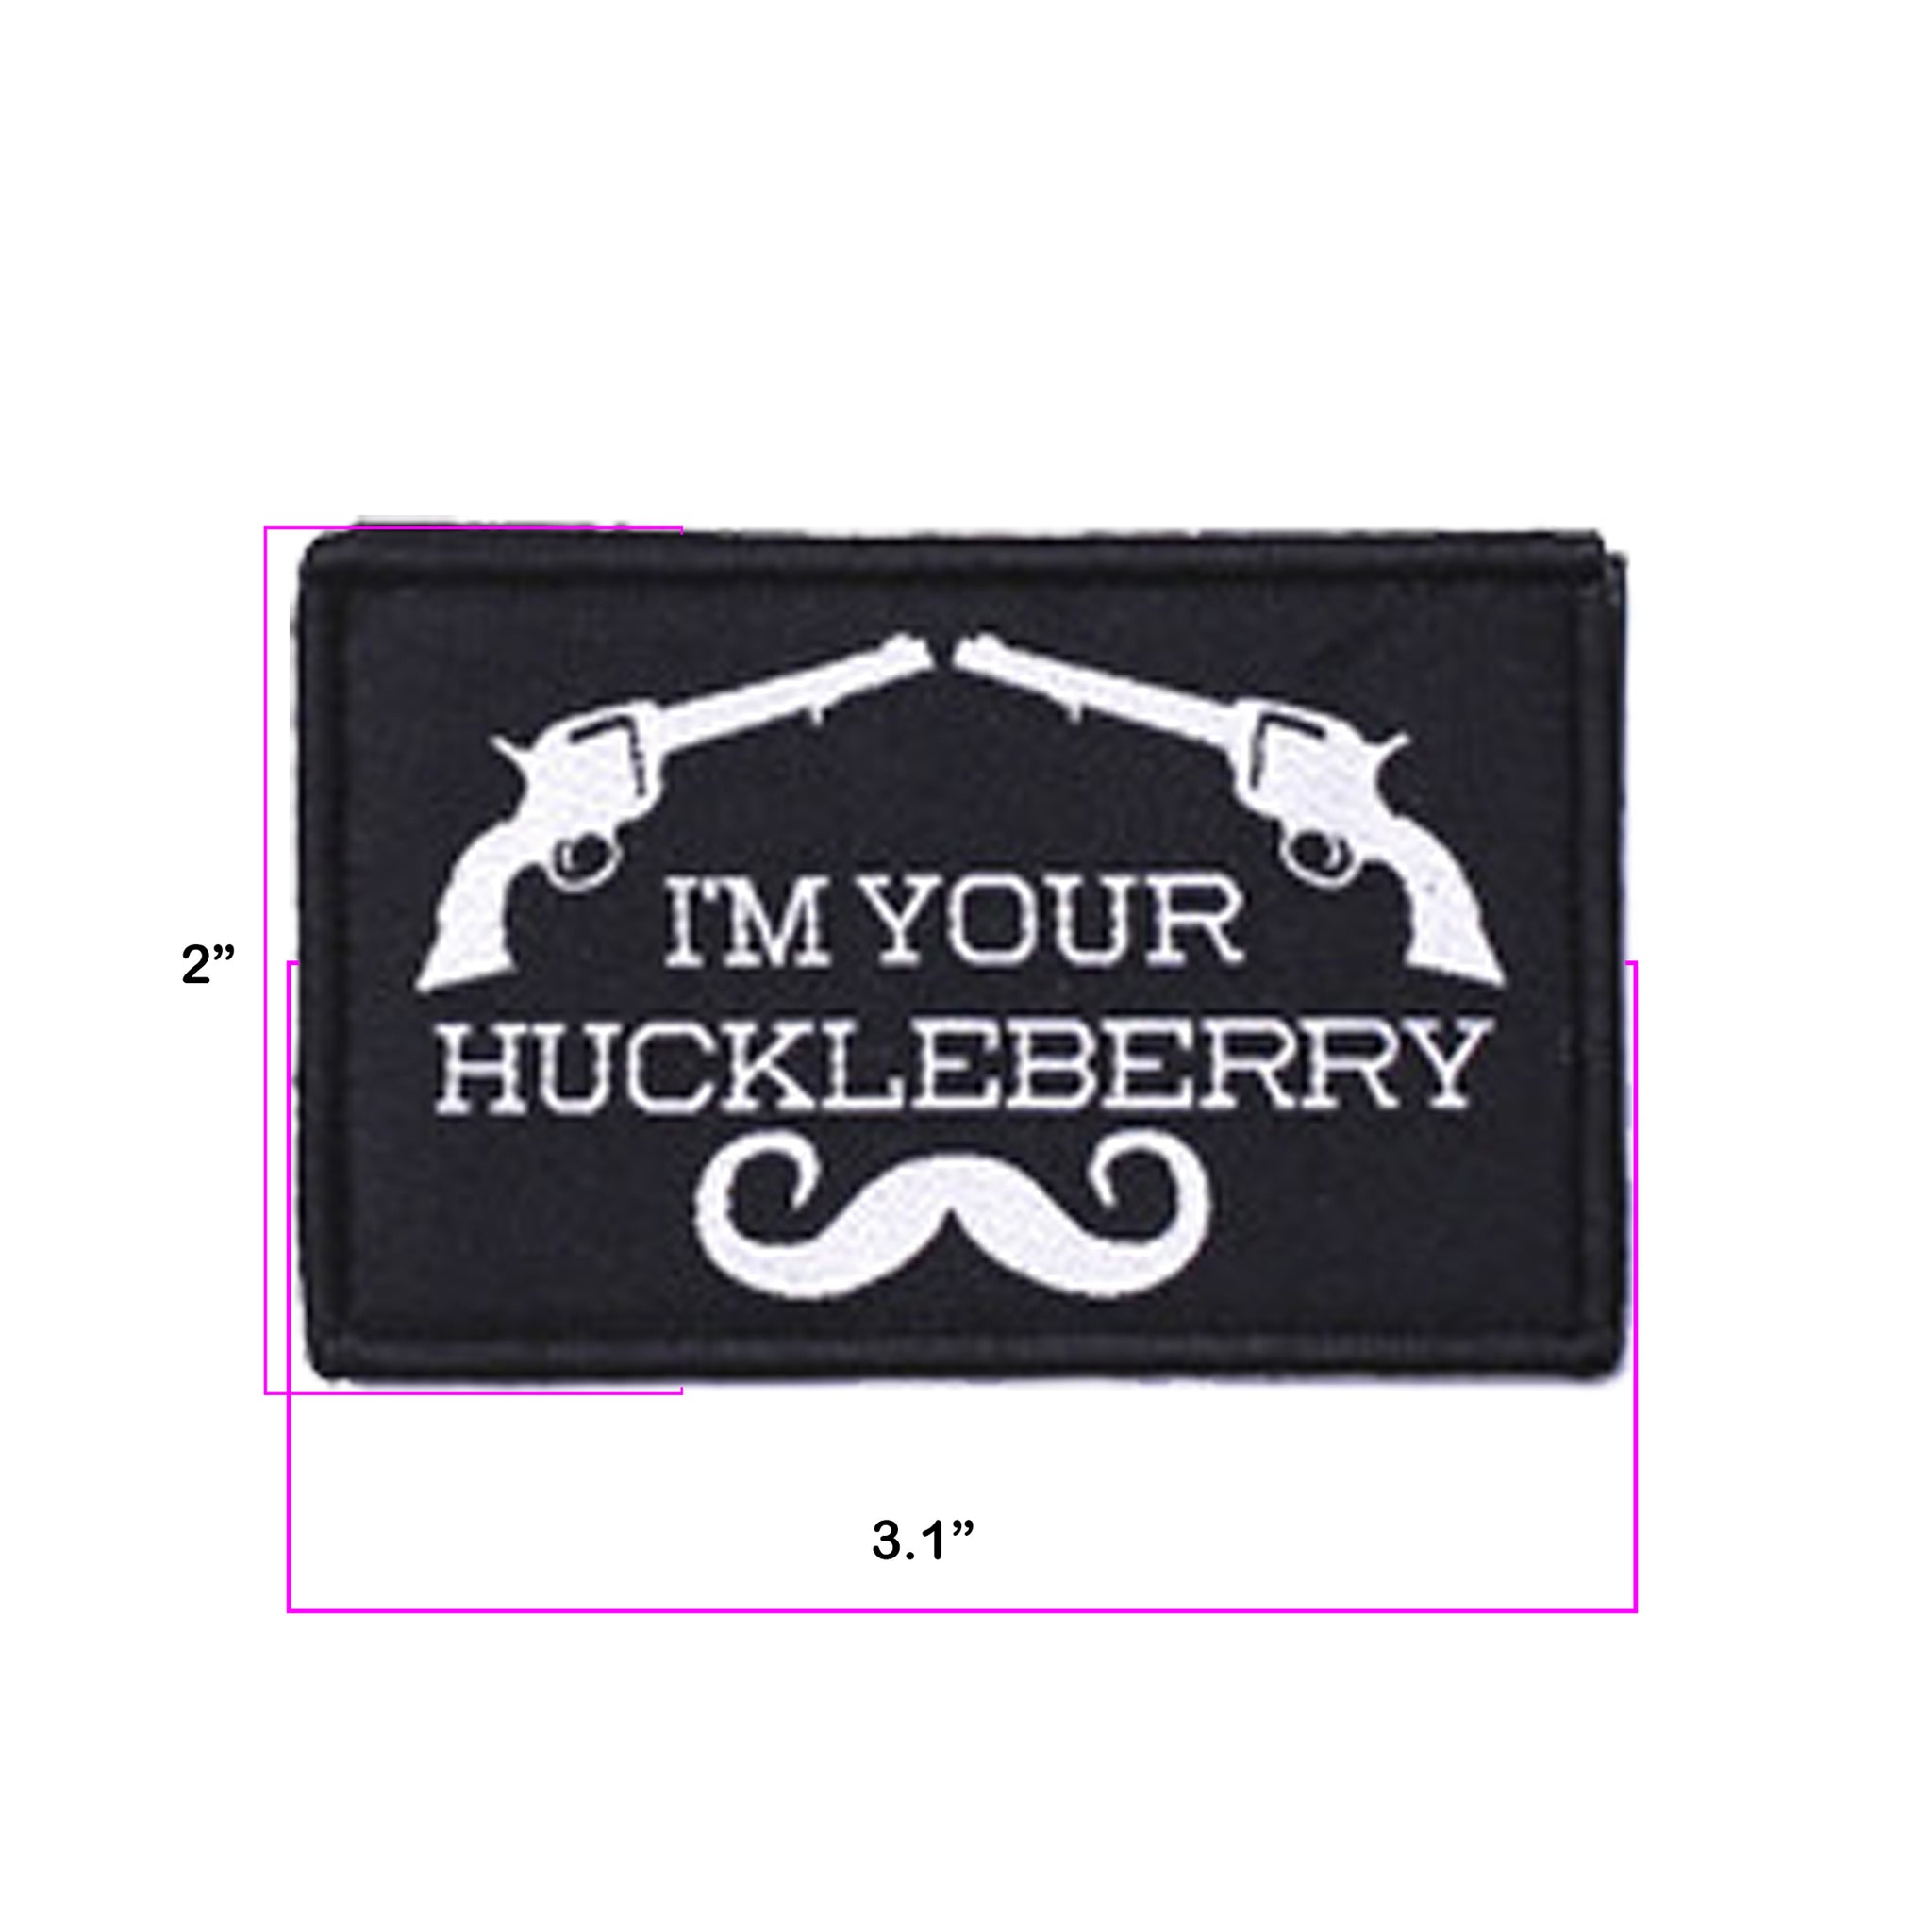 2 Pieces Patches I'm Your Huckleberry Funny Tactical Military Morale Patch Hook & Loop Tactical Patch